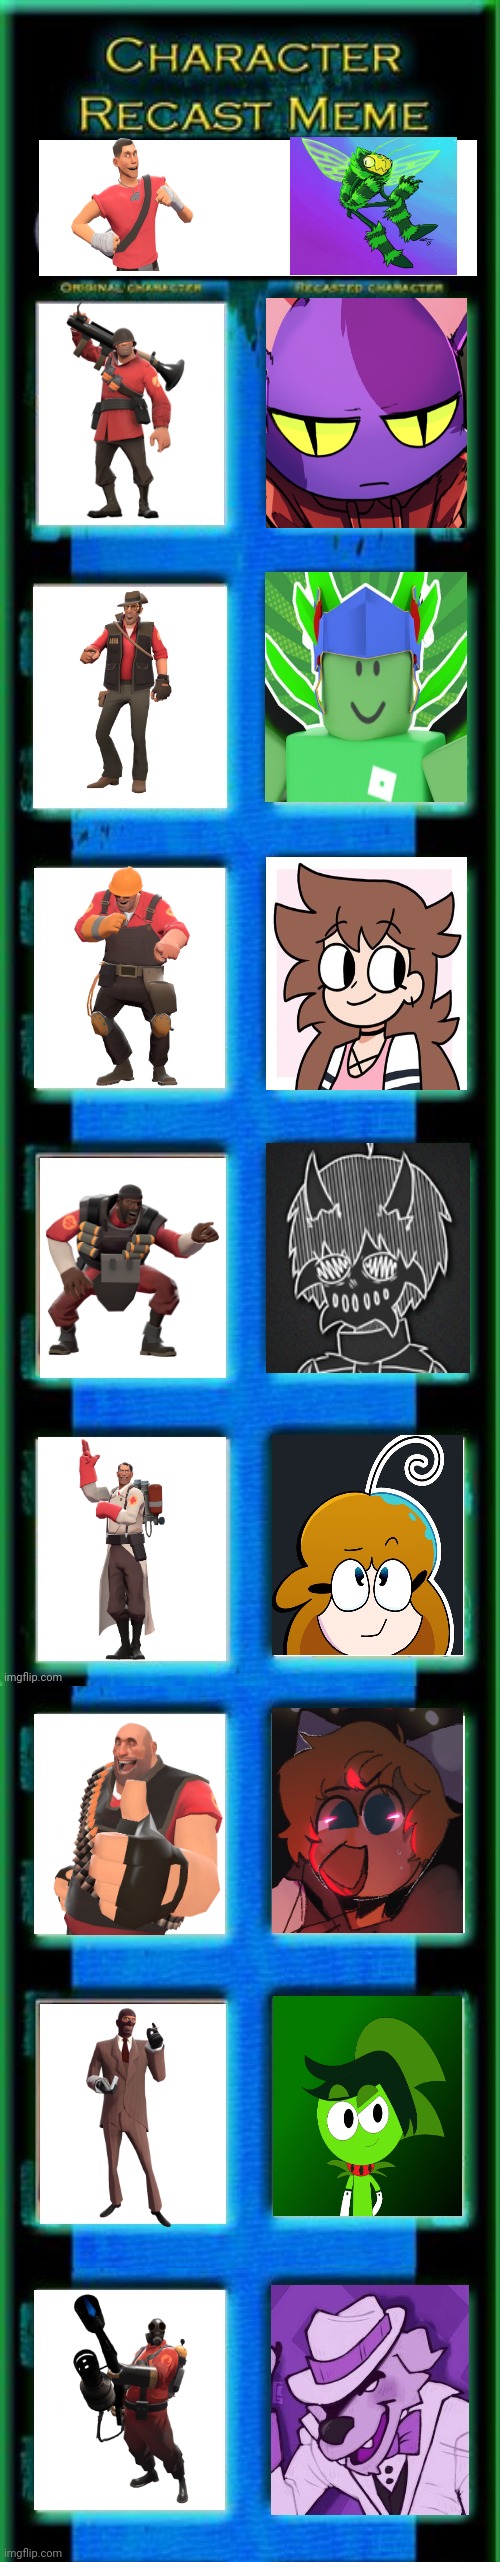 This is how my friends are going to be In pg3d forms inspired by tf2 classes | image tagged in character recast,pg3d,classes,fanmade | made w/ Imgflip meme maker